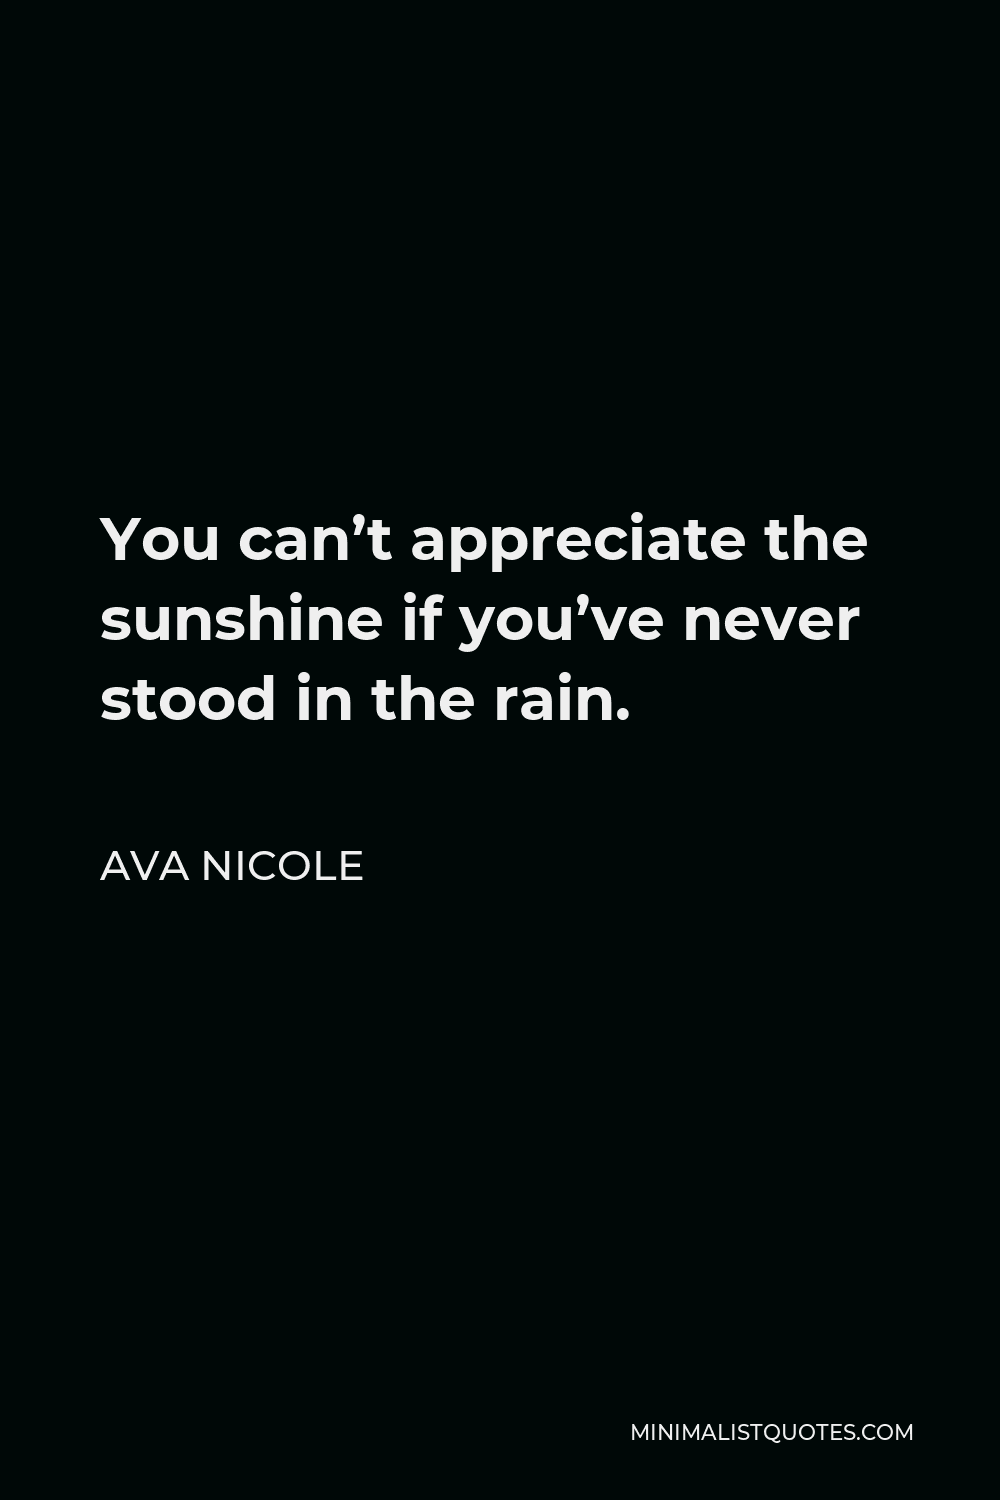 Ava Nicole Quote - You can’t appreciate the sunshine if you’ve never stood in the rain.